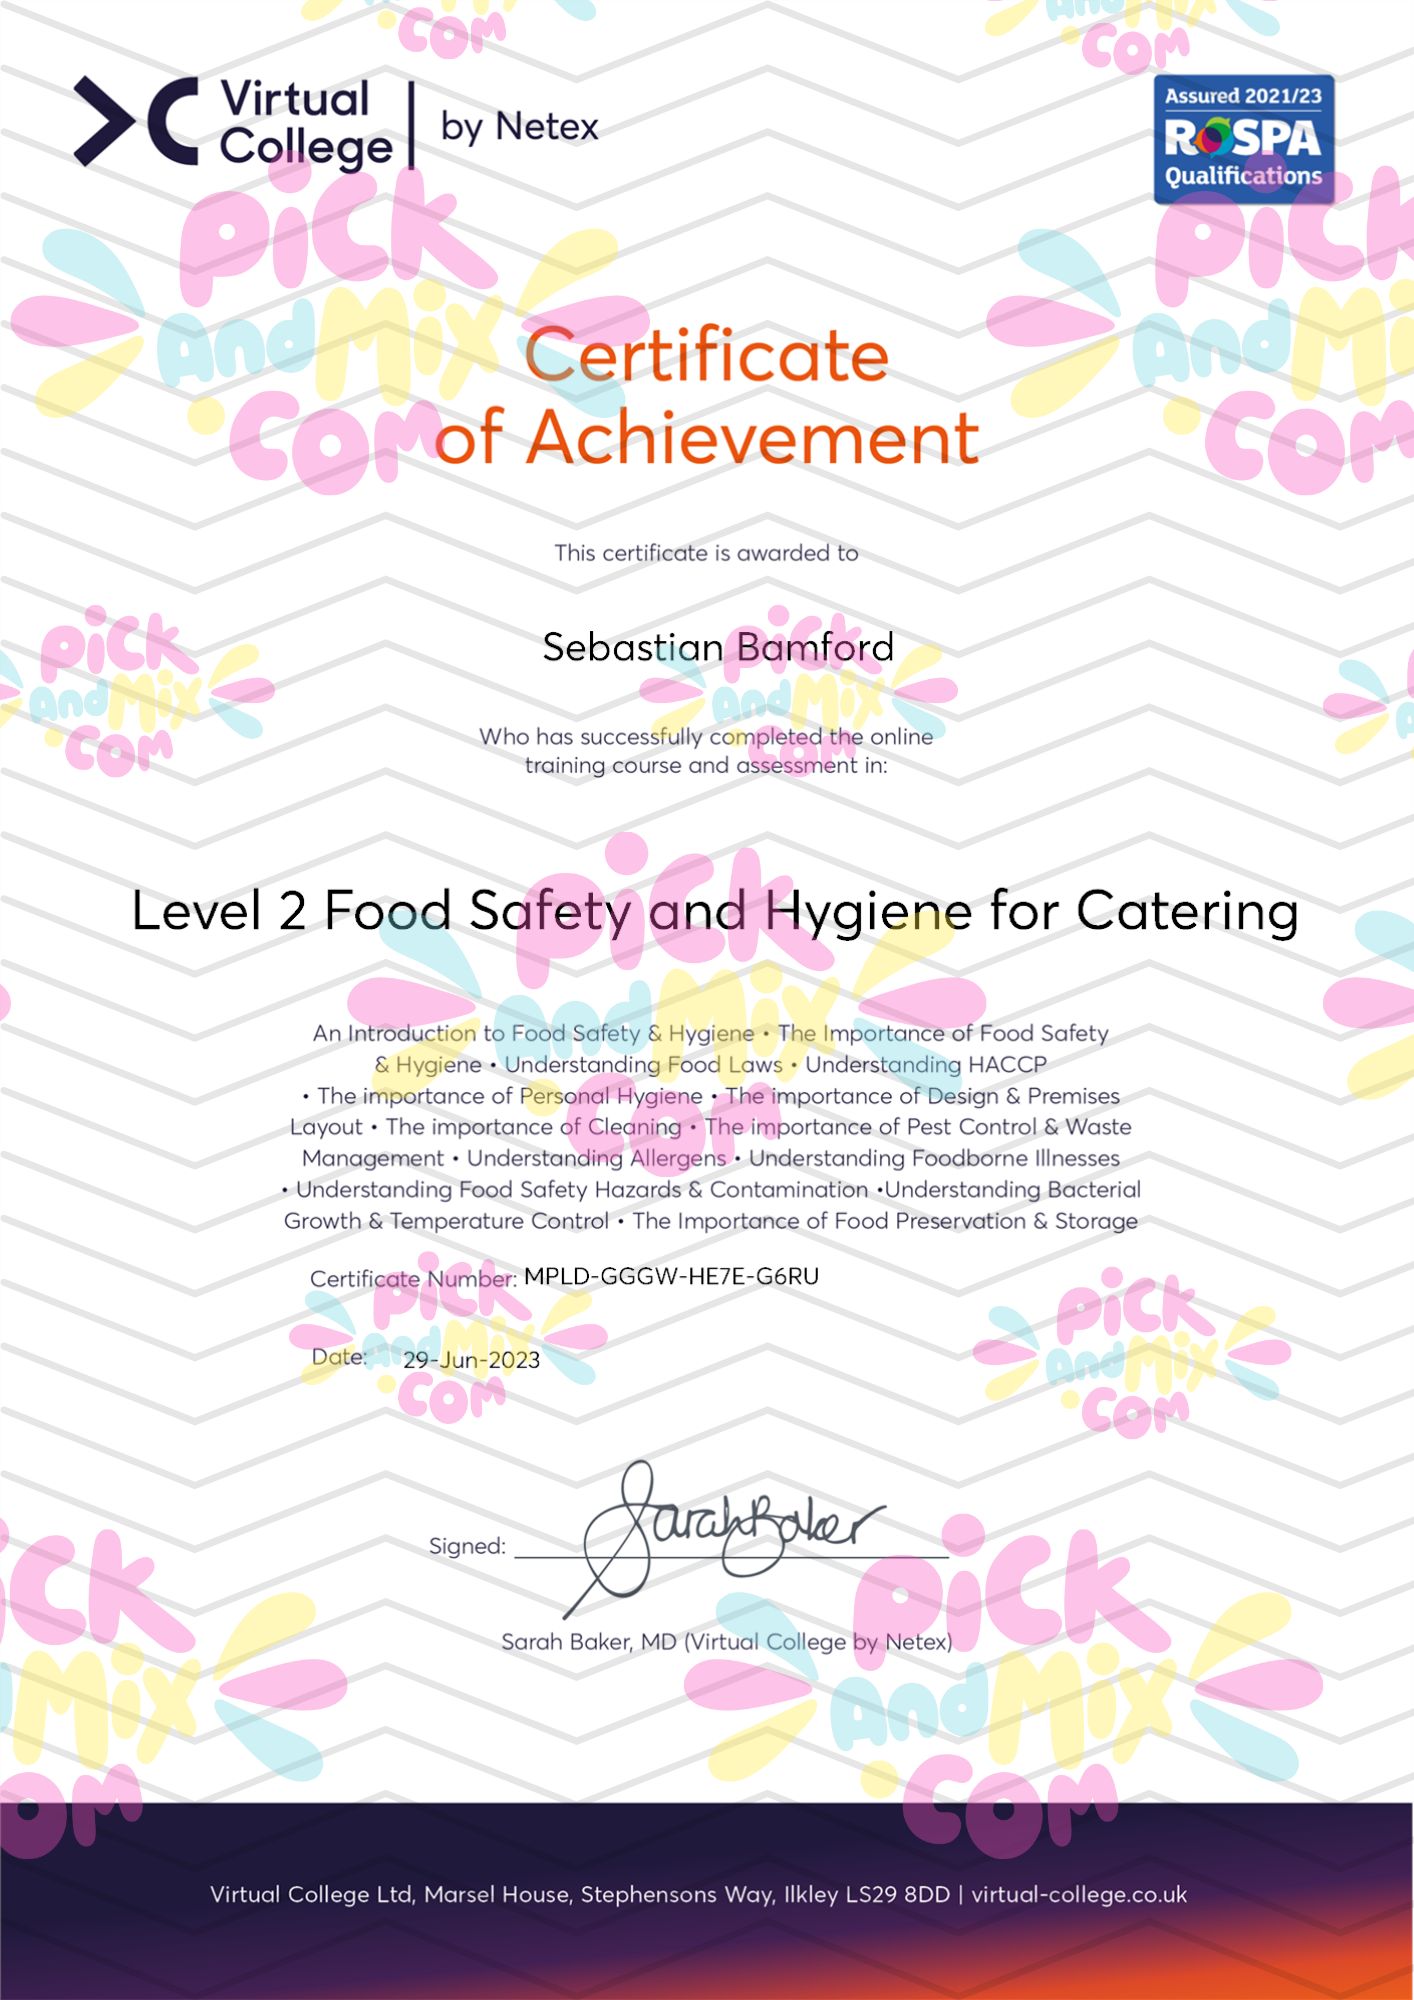 Certificate of Achievement Level 2 Food Safety and Hygiene for Catering